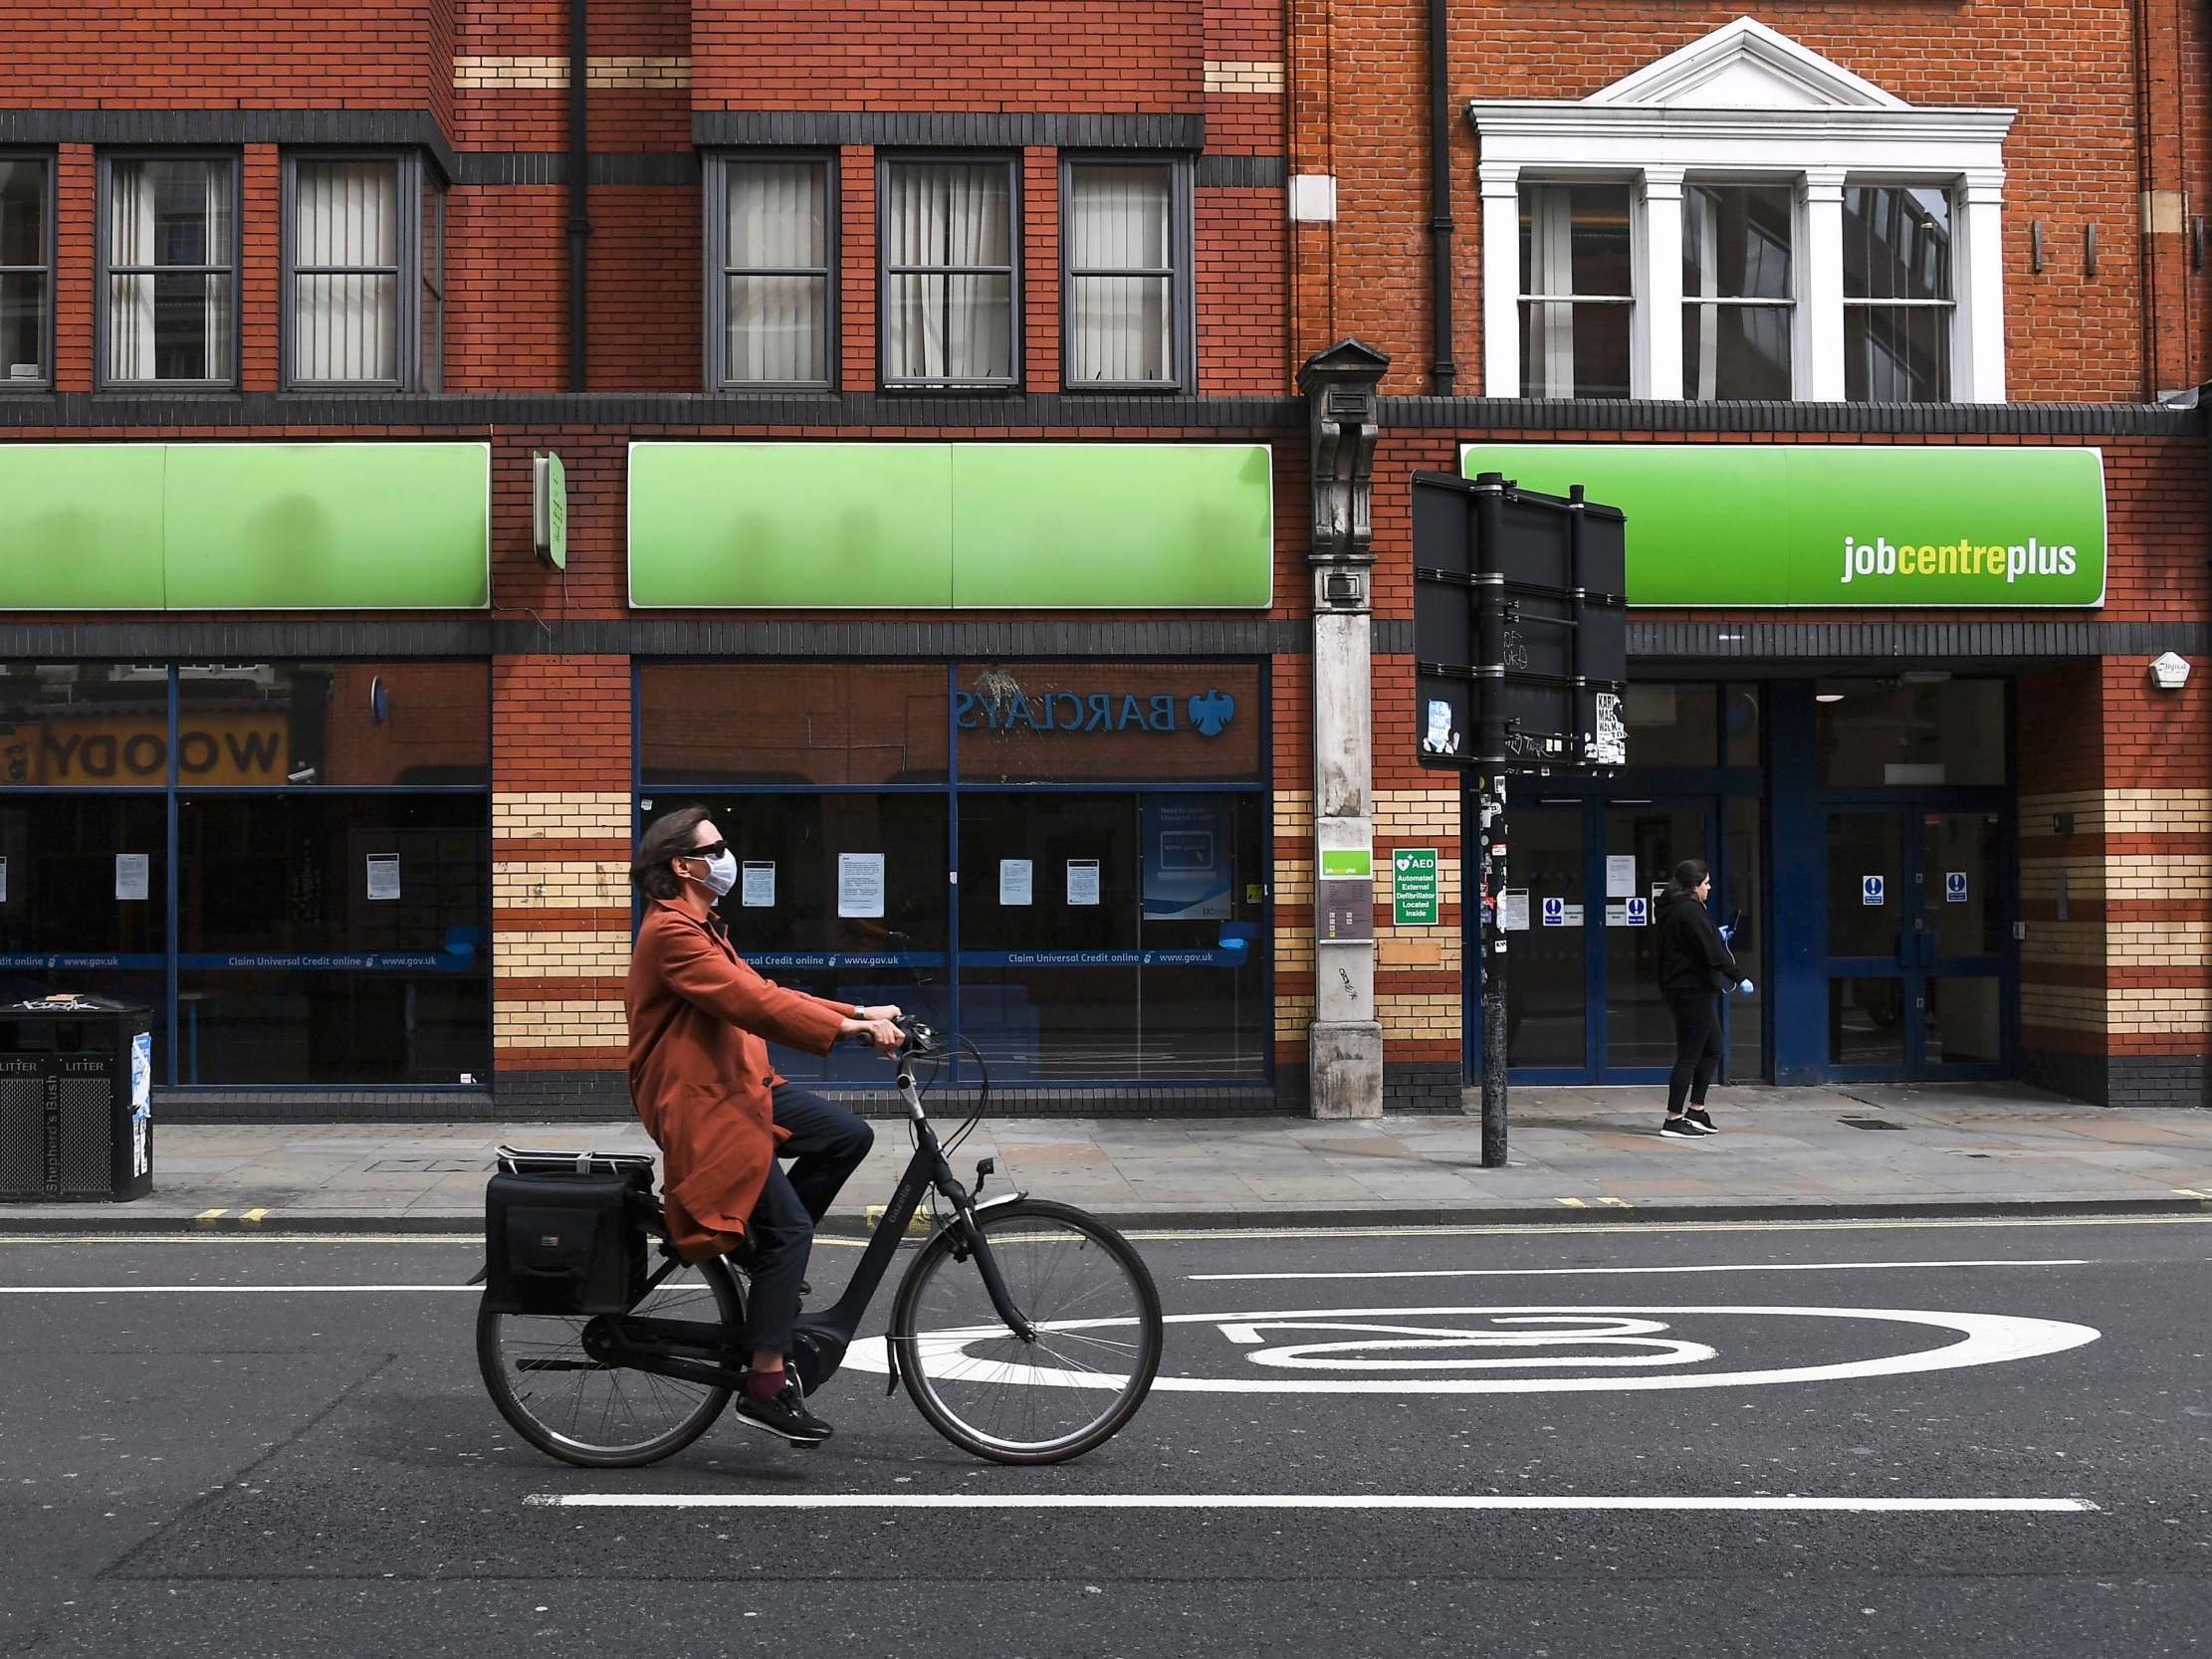 A woman wearing a mask to protect against coronavirus rides a bicycle past a job centre